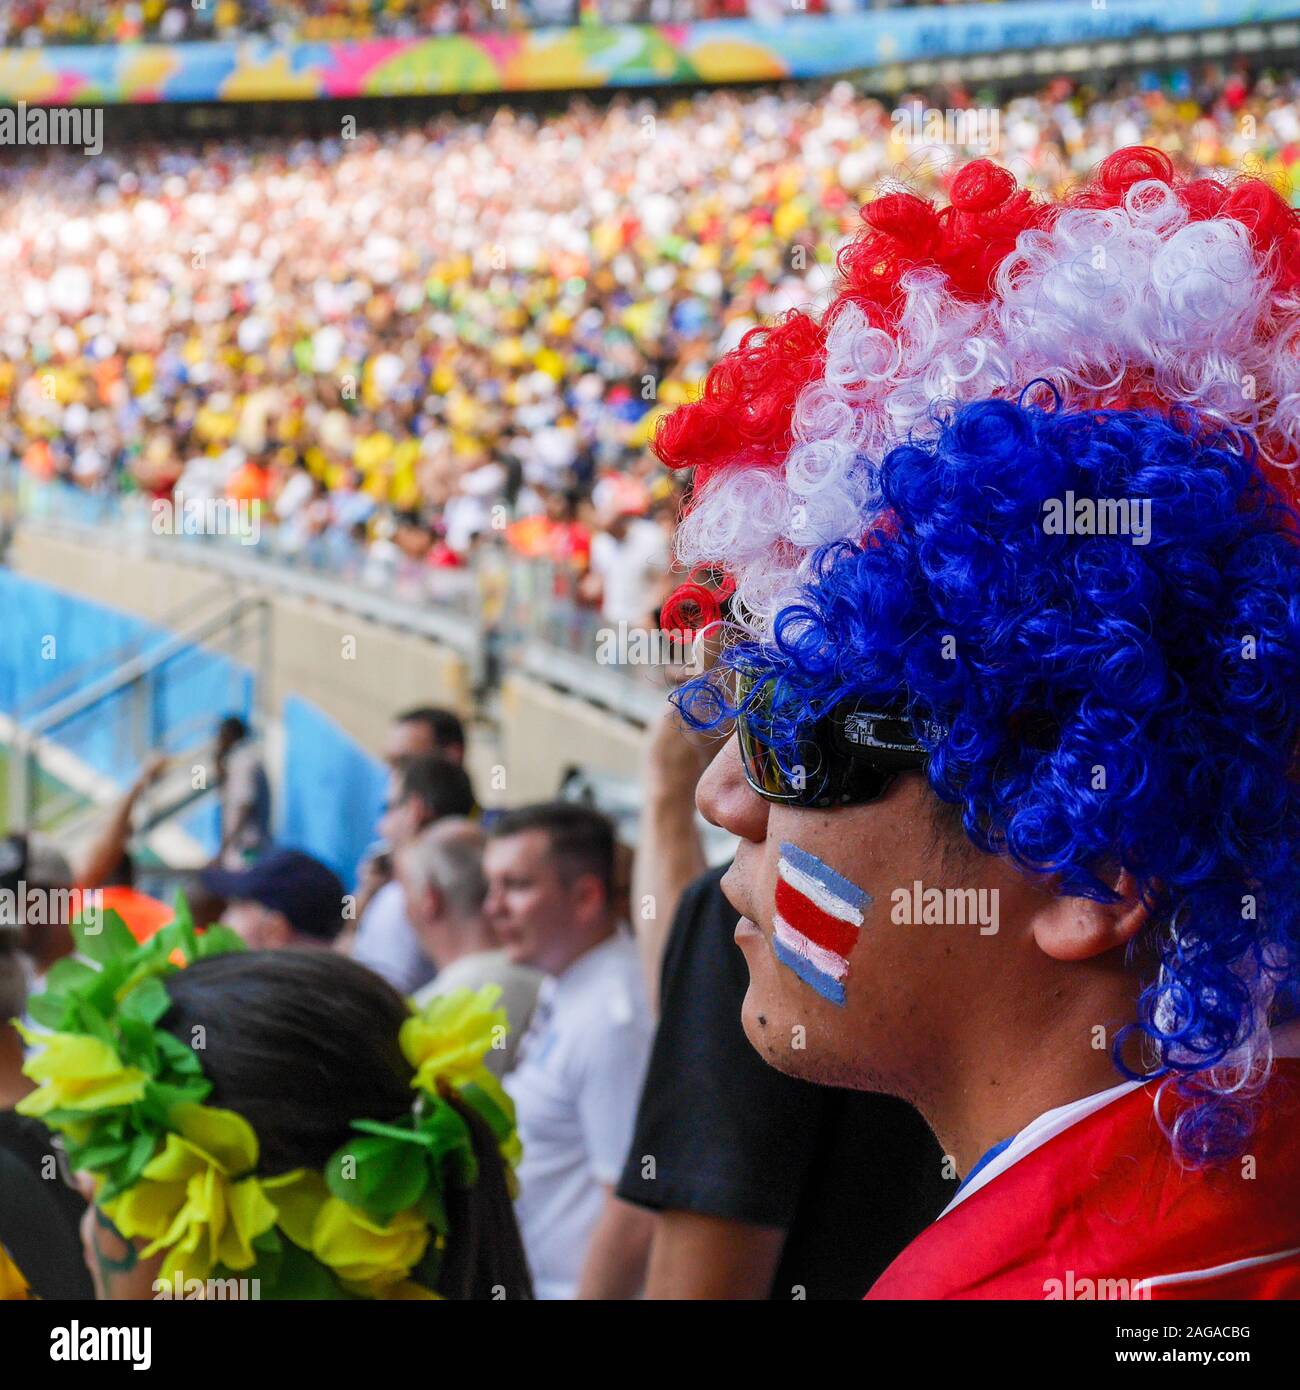 A Costa Rica soccer fan supporting his national team at an International football game, playing England in the 2014 World Cup. Stock Photo